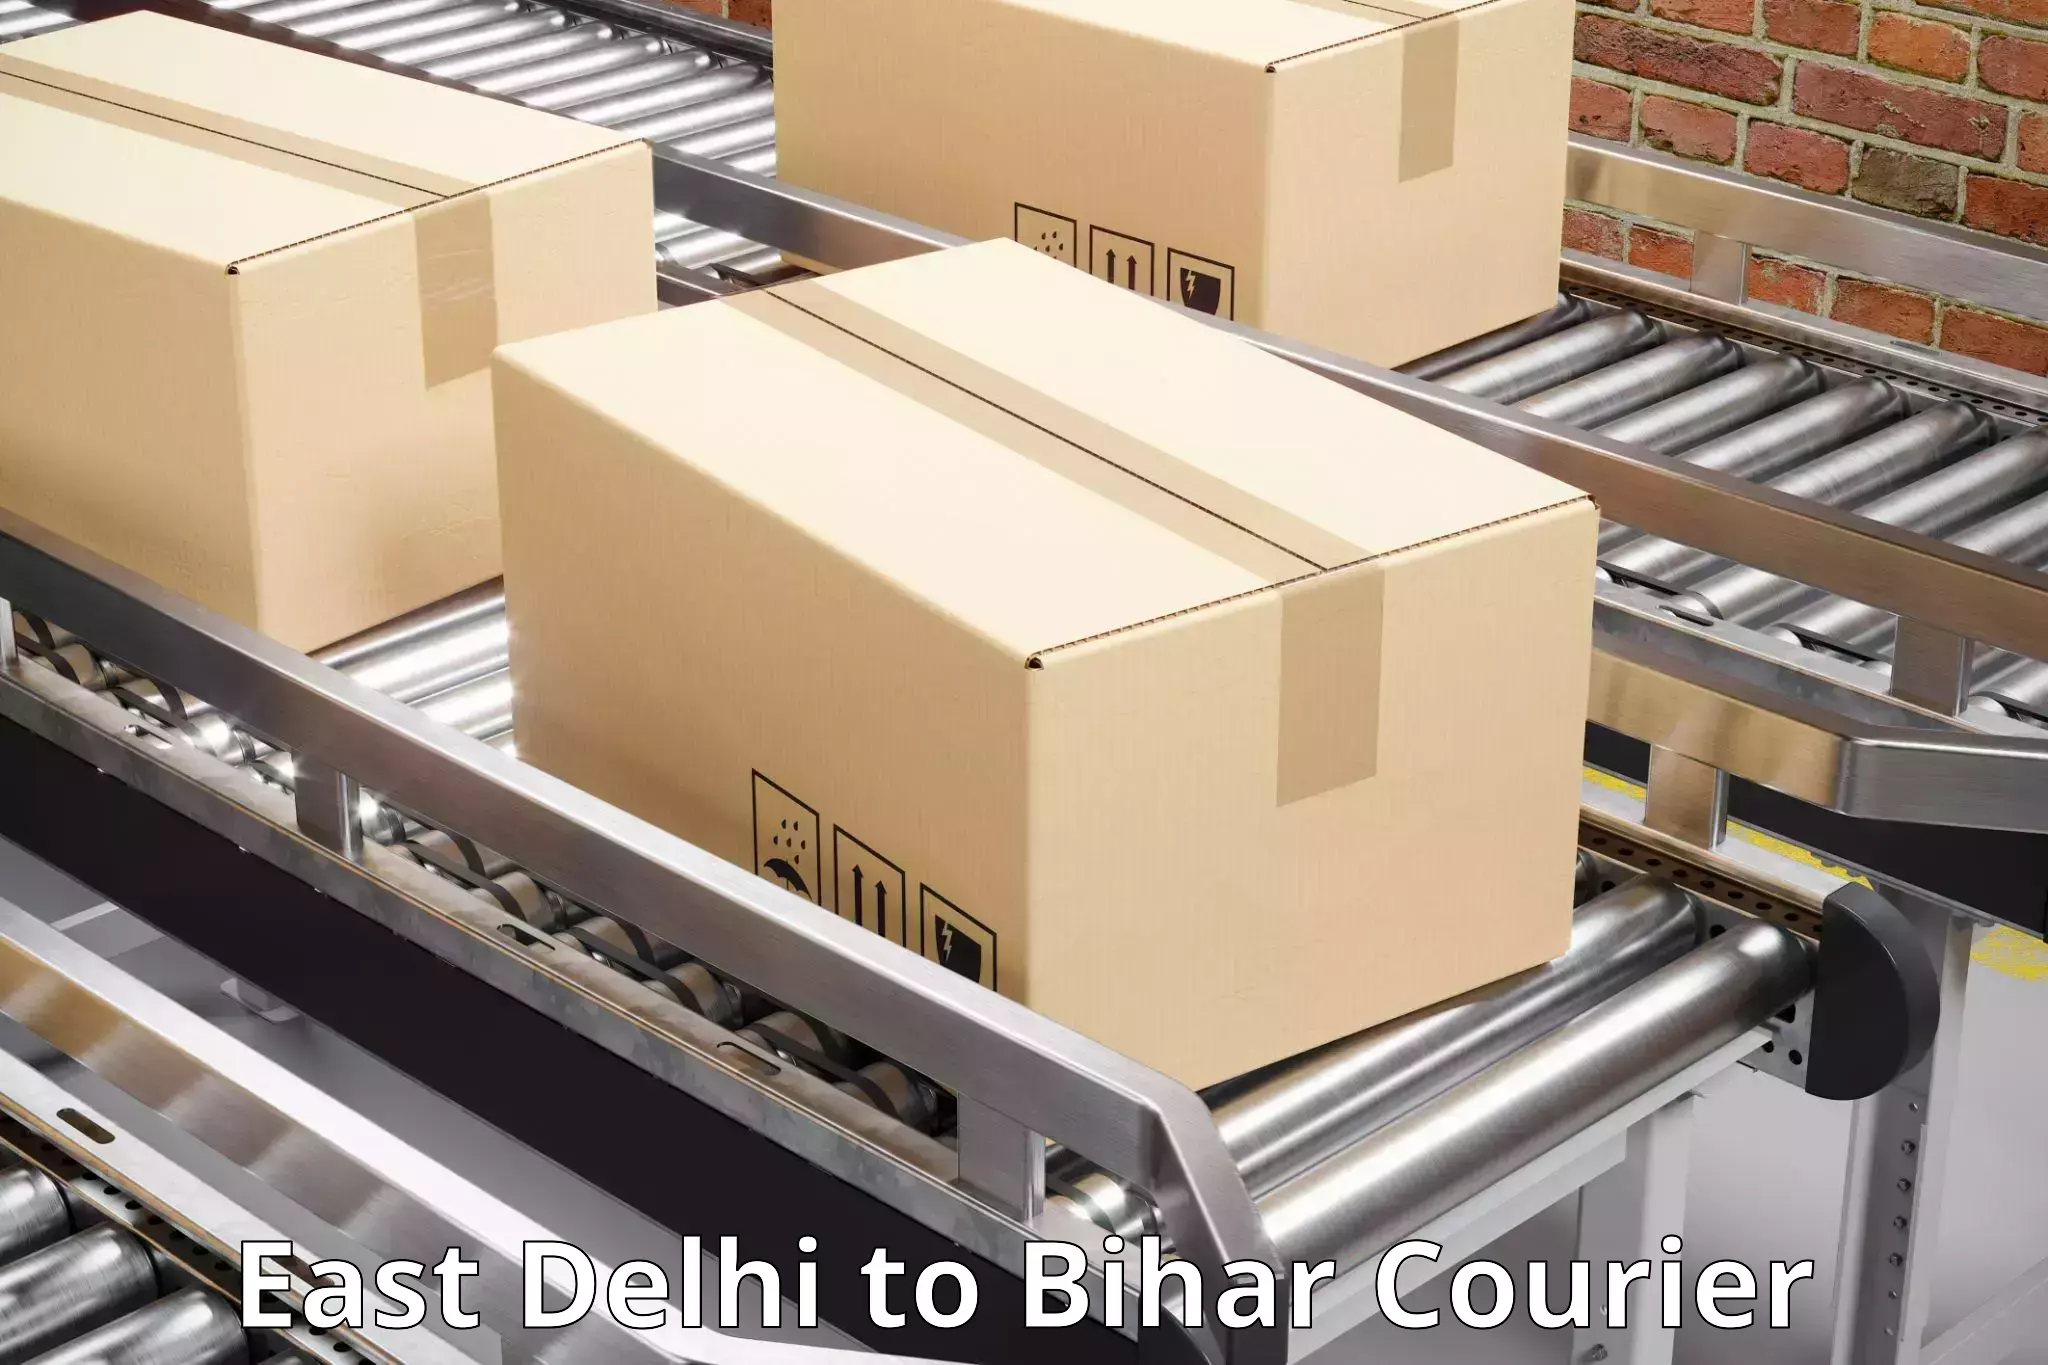 Seamless shipping experience East Delhi to Buxar